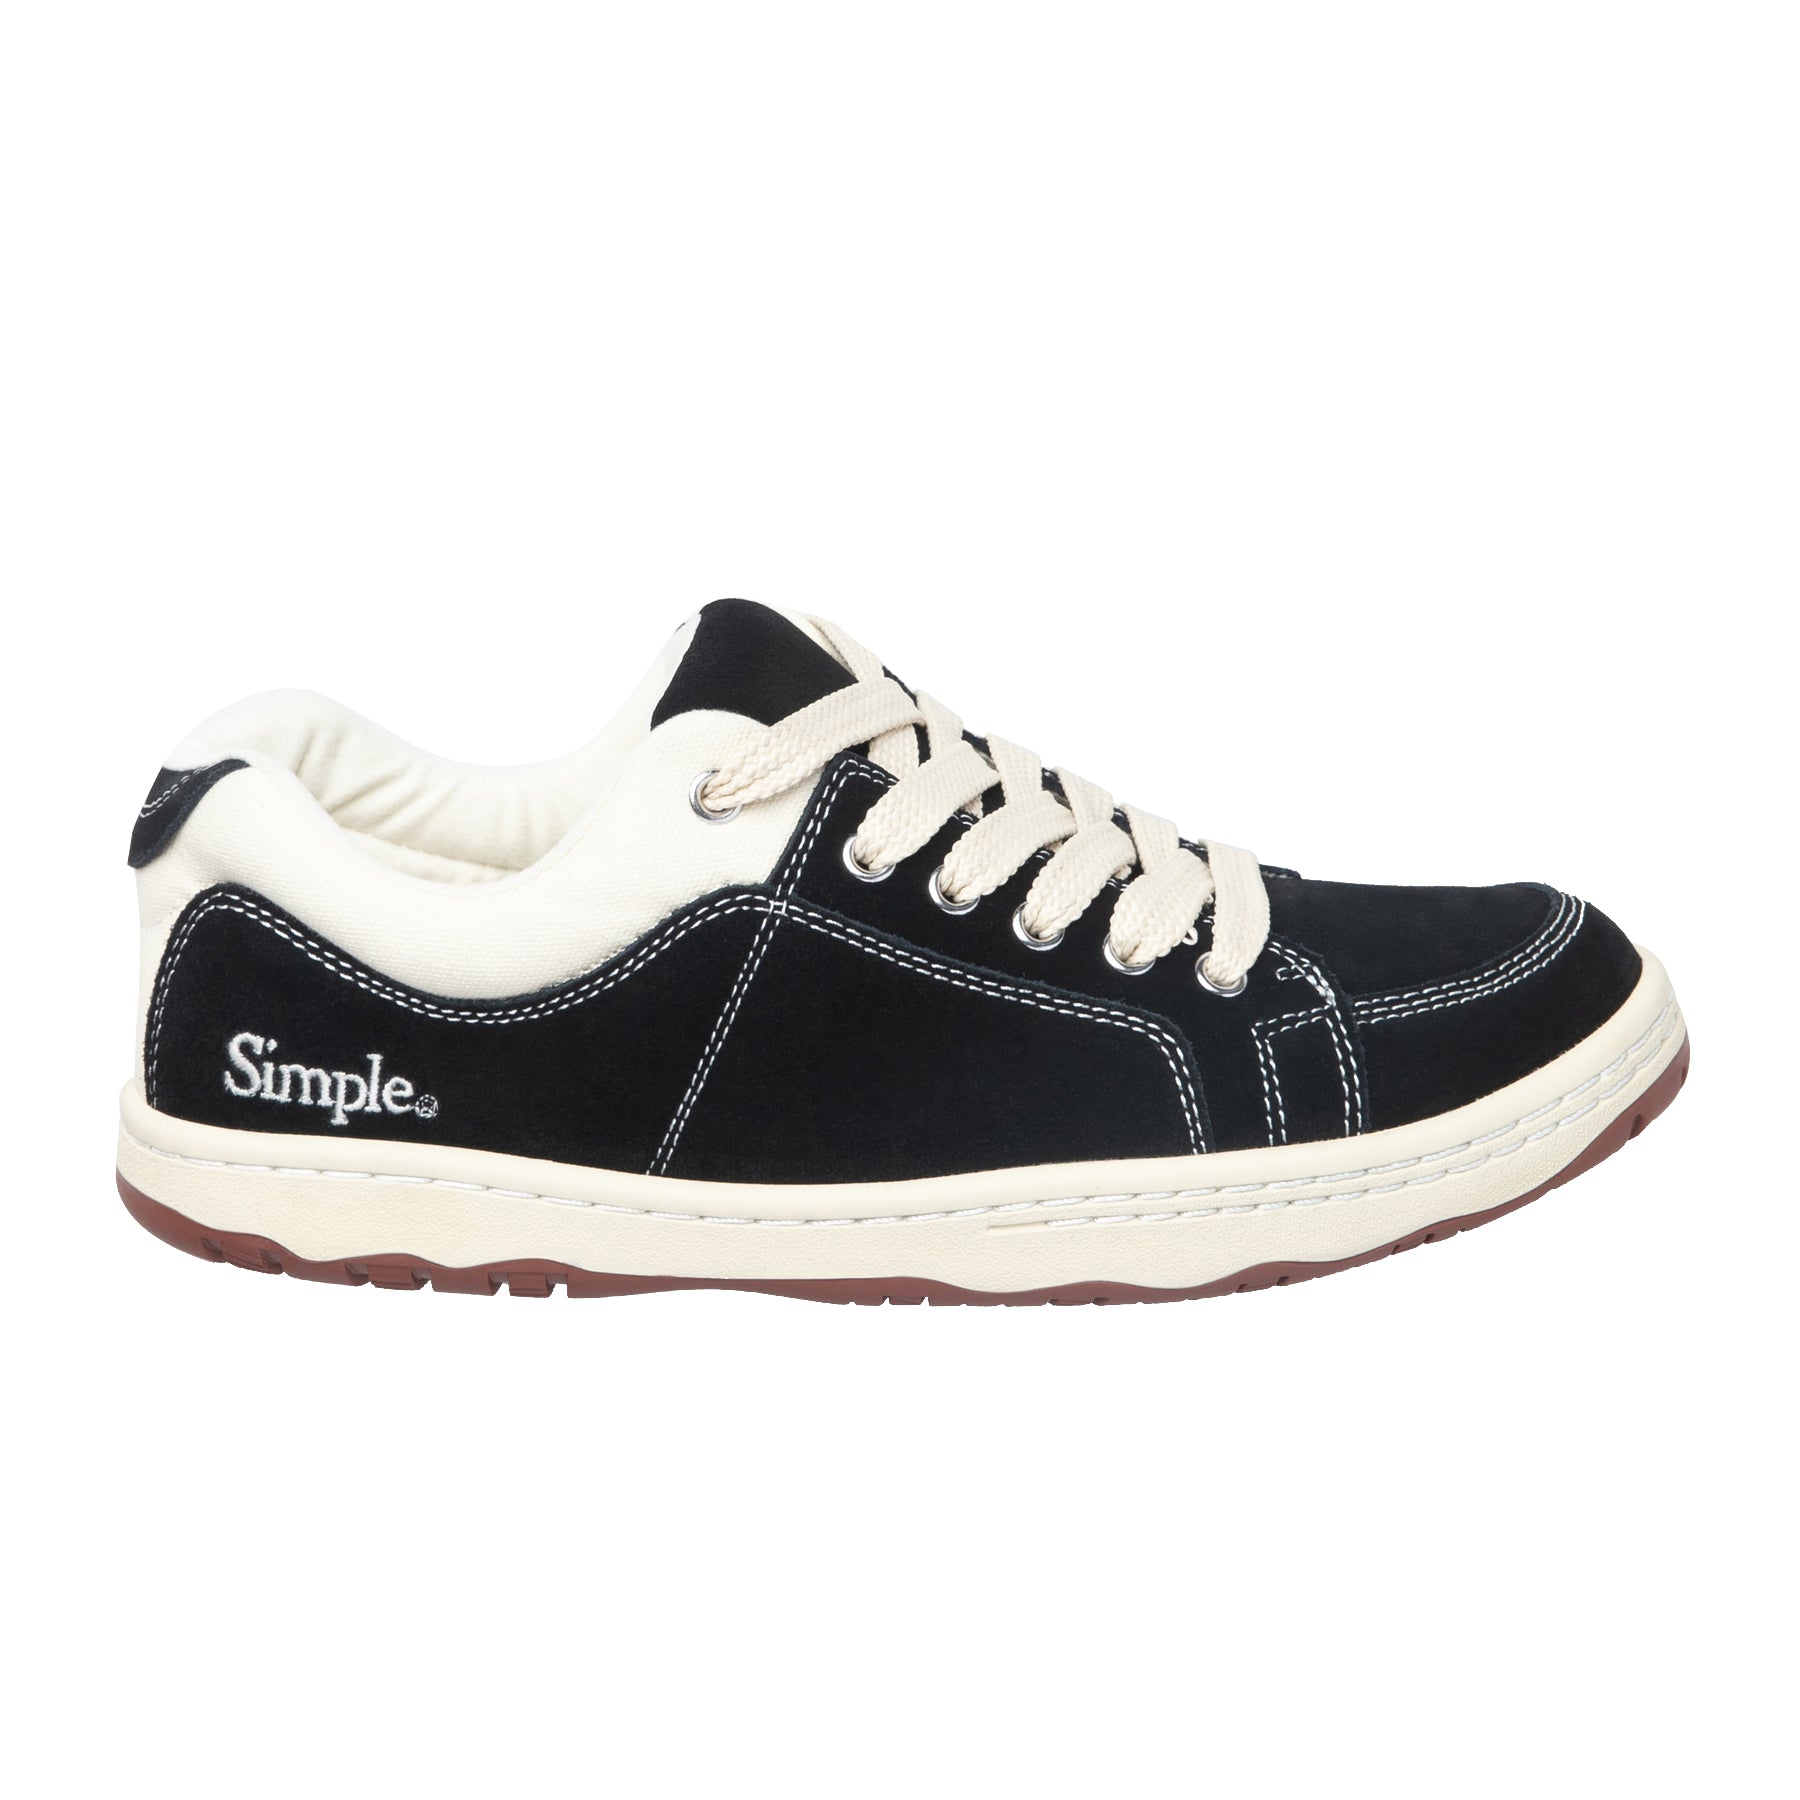 Simple OS Shoes